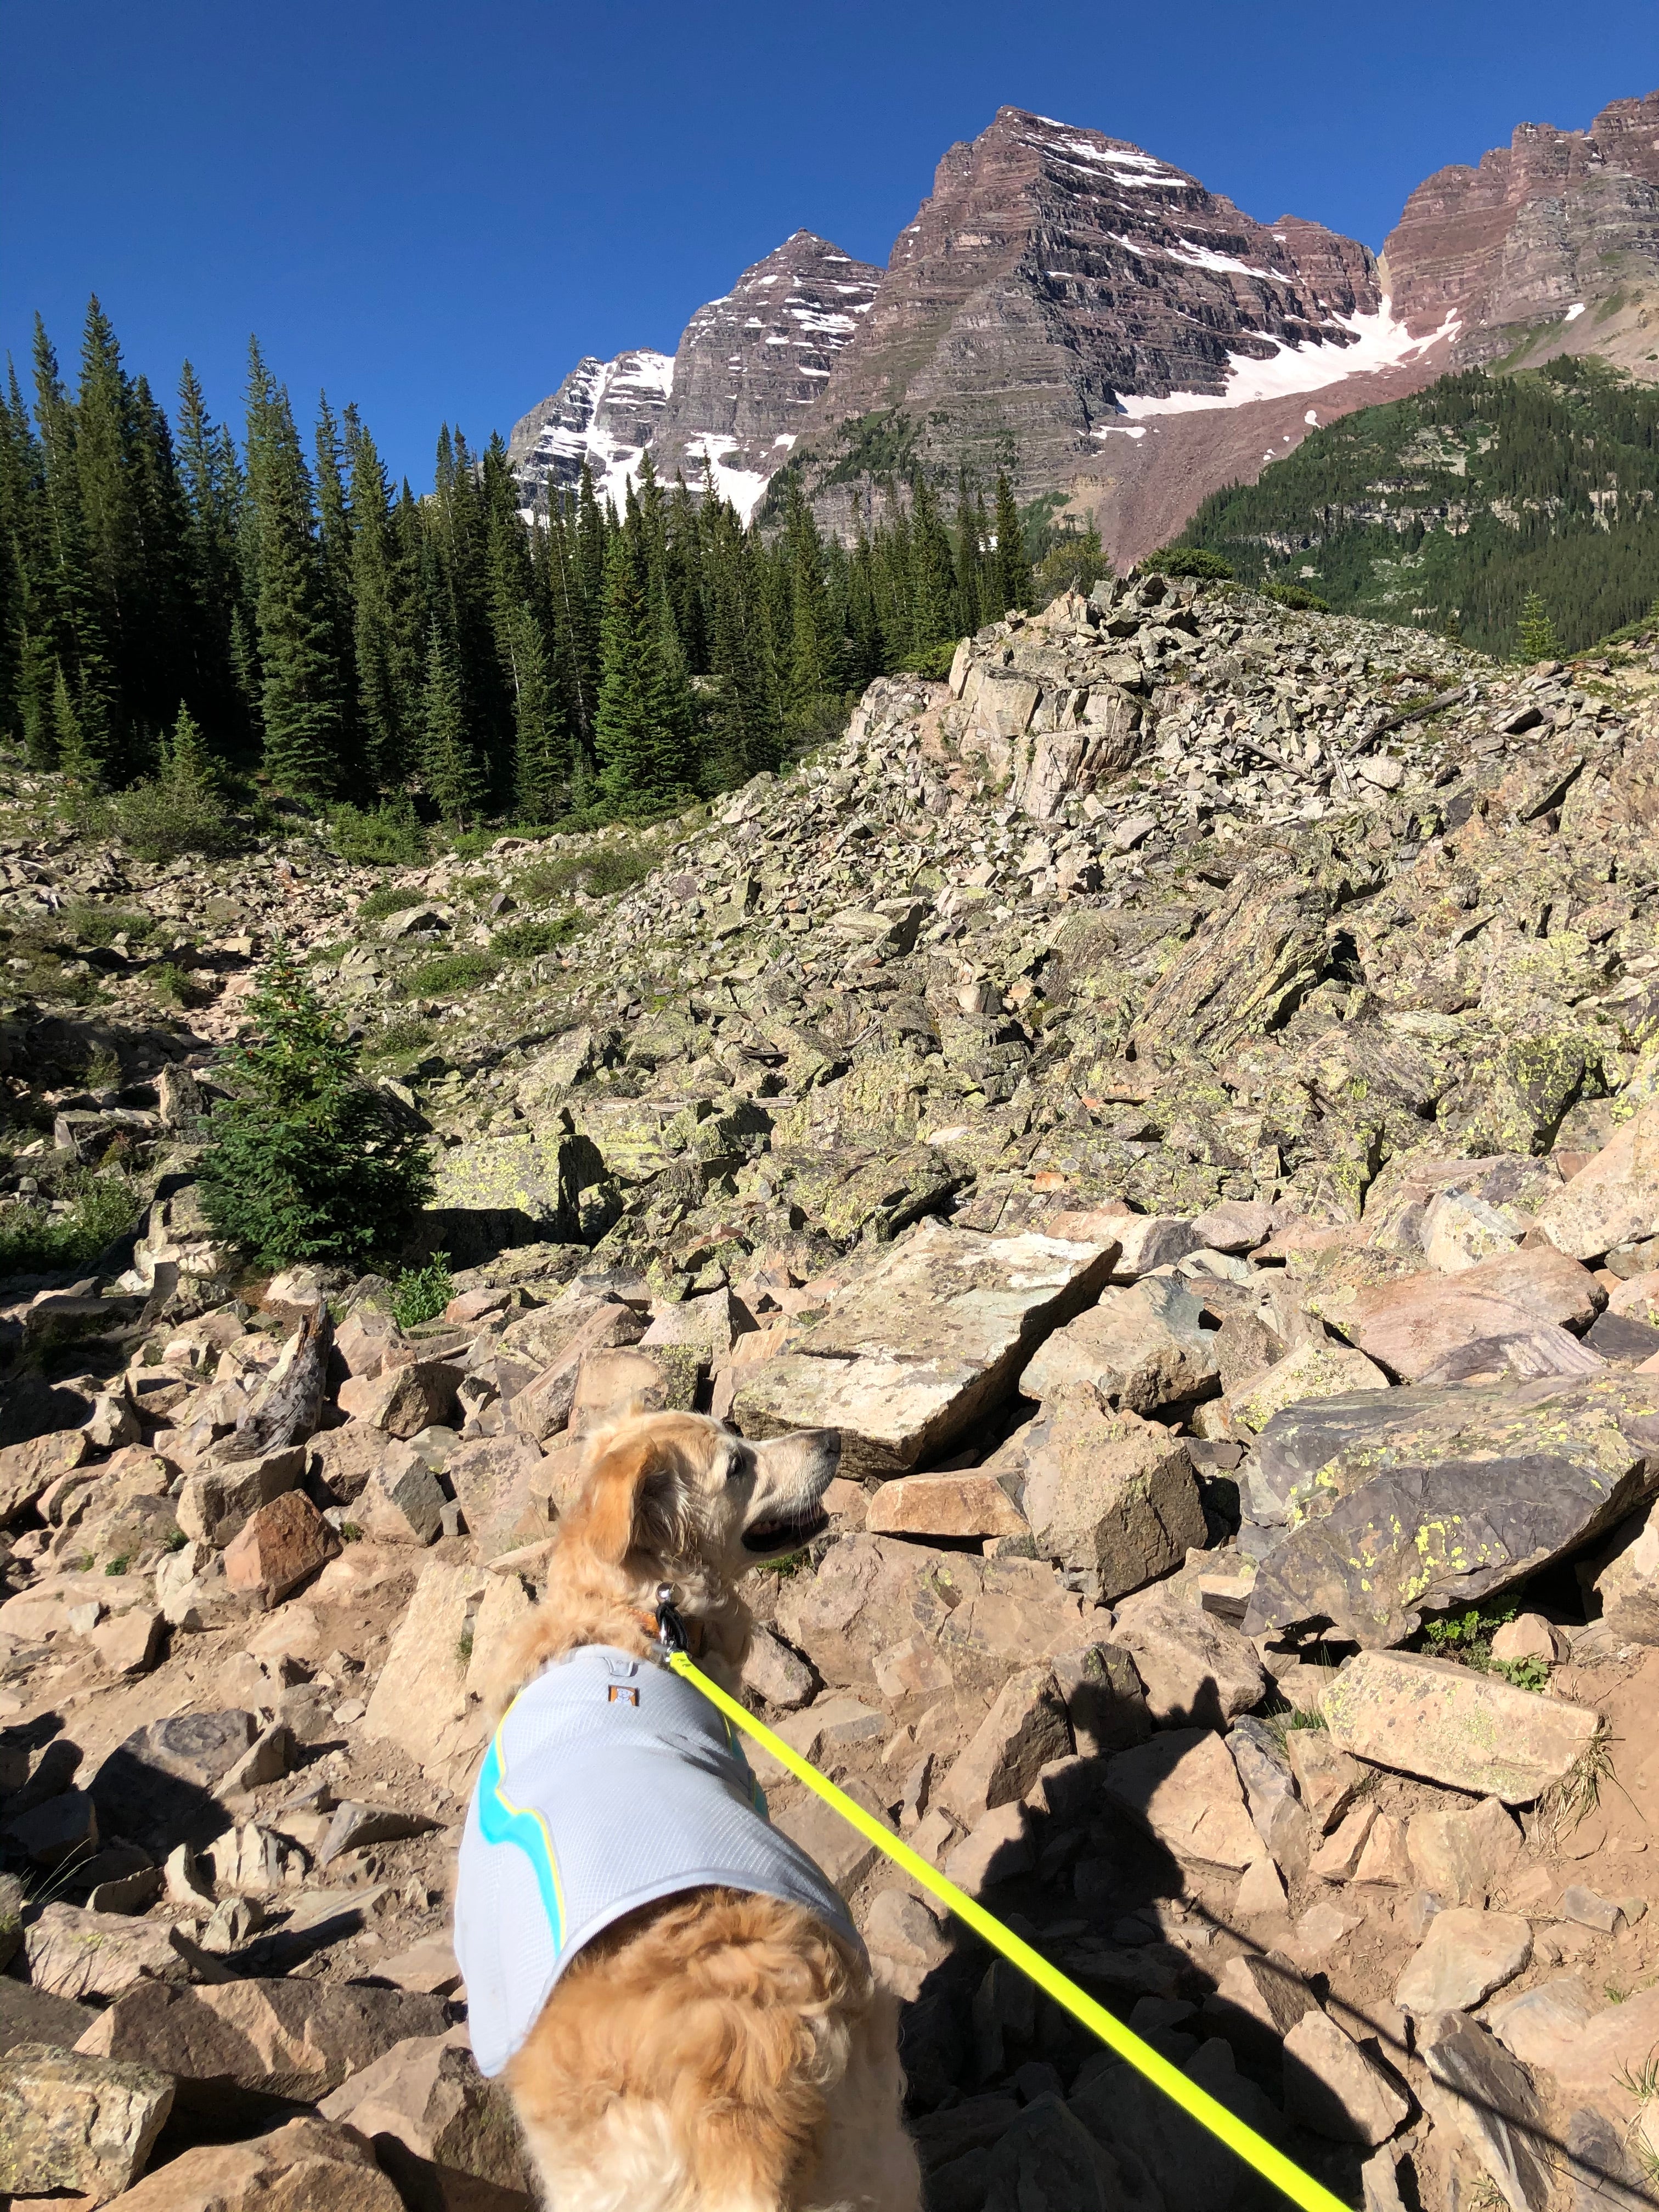 Camper submitted image from Maroon Bells-Snowmass Wilderness Dispersed Camping - 1